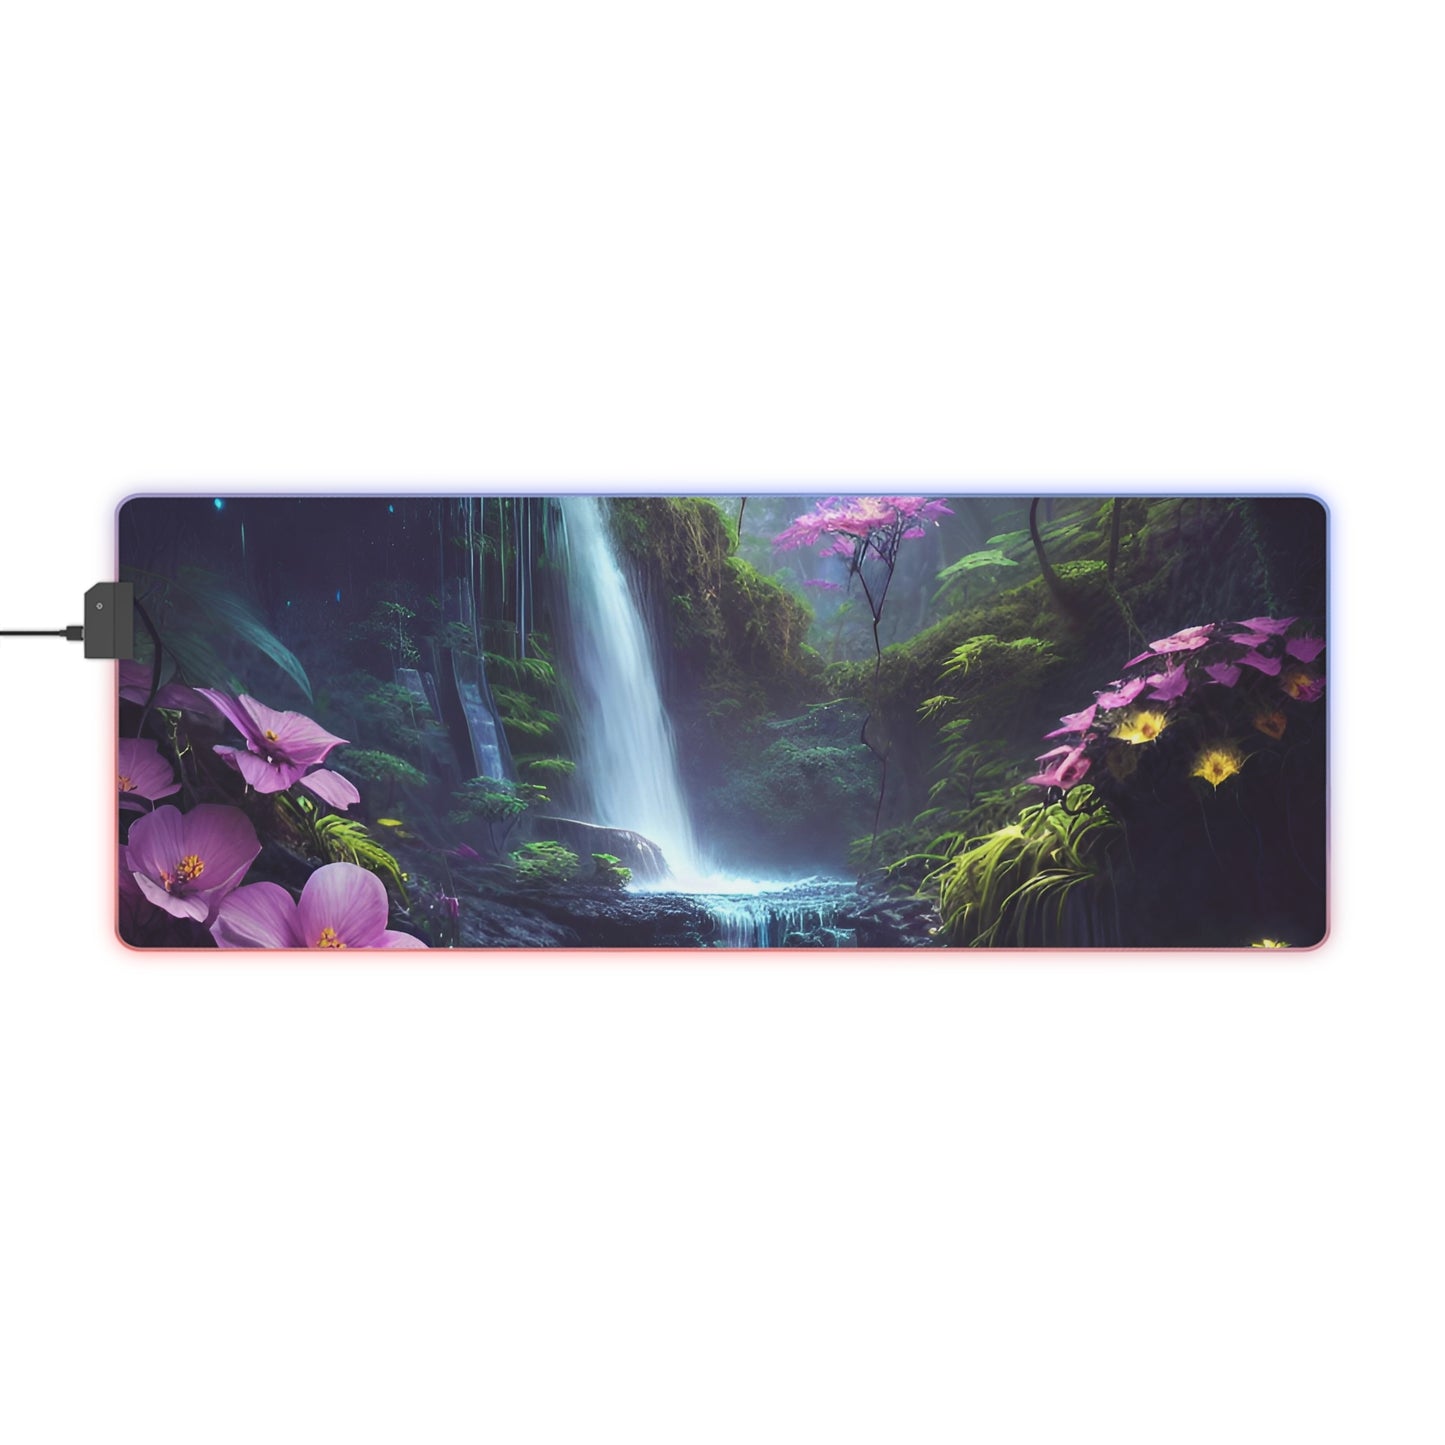 Mystical forest 03 LED Gaming Mouse Pad